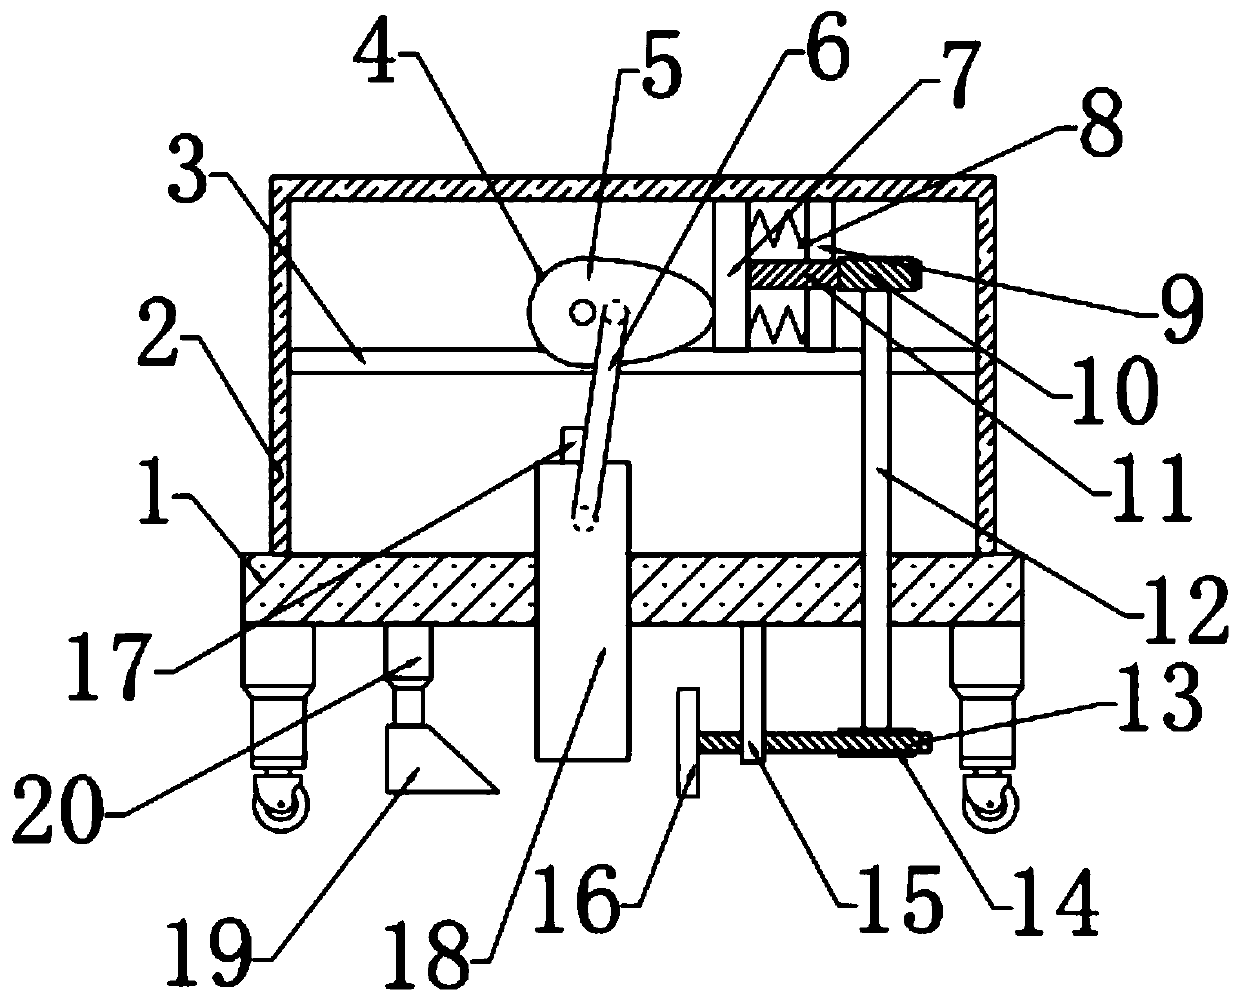 Ground surface dressing device for building construction